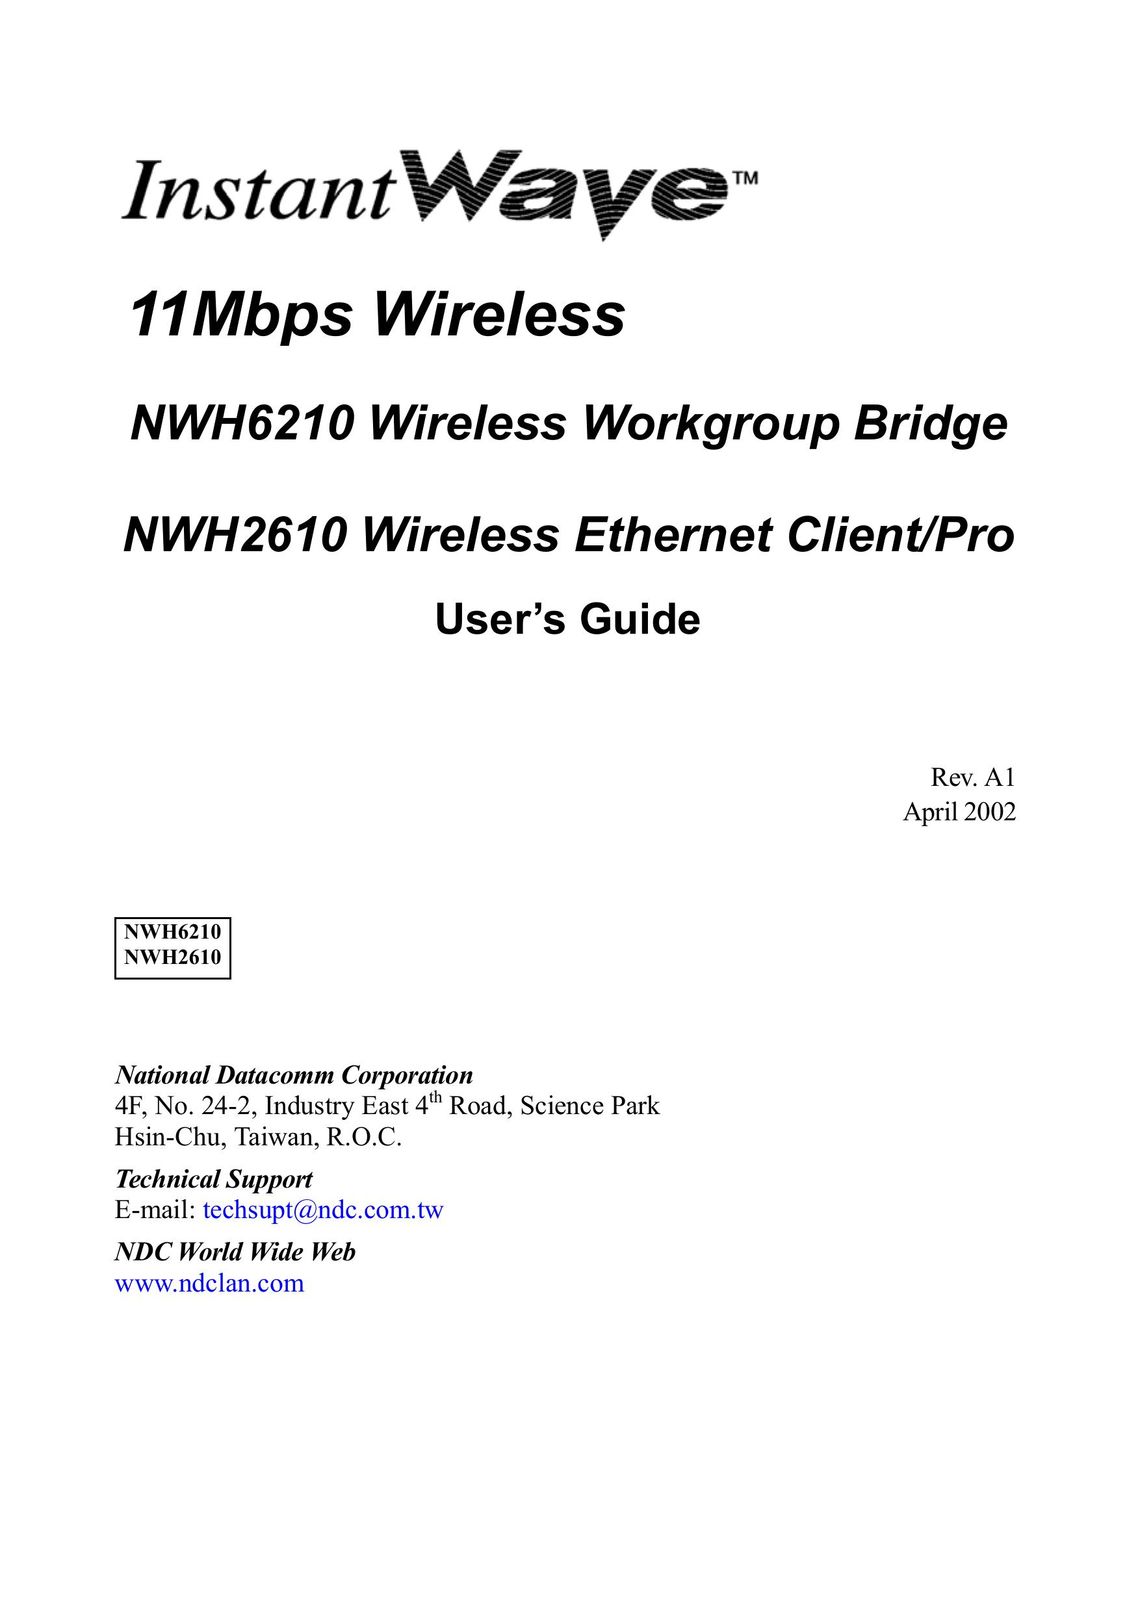 NDC comm NWH6210 Network Card User Manual